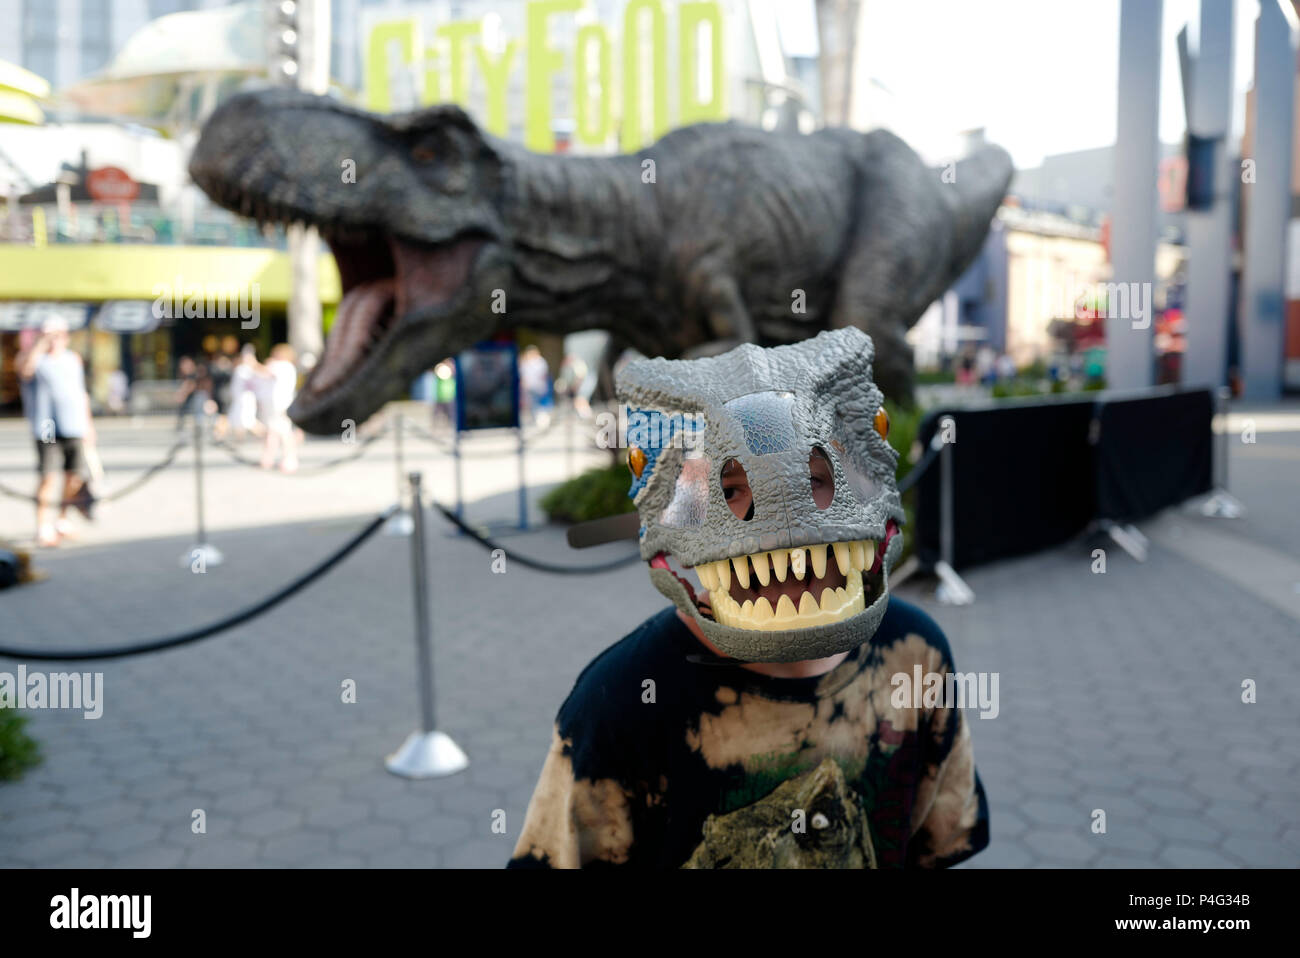 Los Angeles, USA. 21st June, 2018. A boy with a dinosaur mask poses for pictures with a giant Tyrannosaurus rex statue at Universal CityWalk in Los Angeles, the United States, on June 21, 2018. For the promotion of the screening of the new film "Jurassic World: Fallen Kingdom" on Universal Cinema Theatres, a colossal 3-ton Tyrannosaurus rex, a life-sized Gyrosphere original movie prop, as well as original costume, are displayed for public at Universal CityWalk. Credit: Zhao Hanrong/Xinhua/Alamy Live News Stock Photo